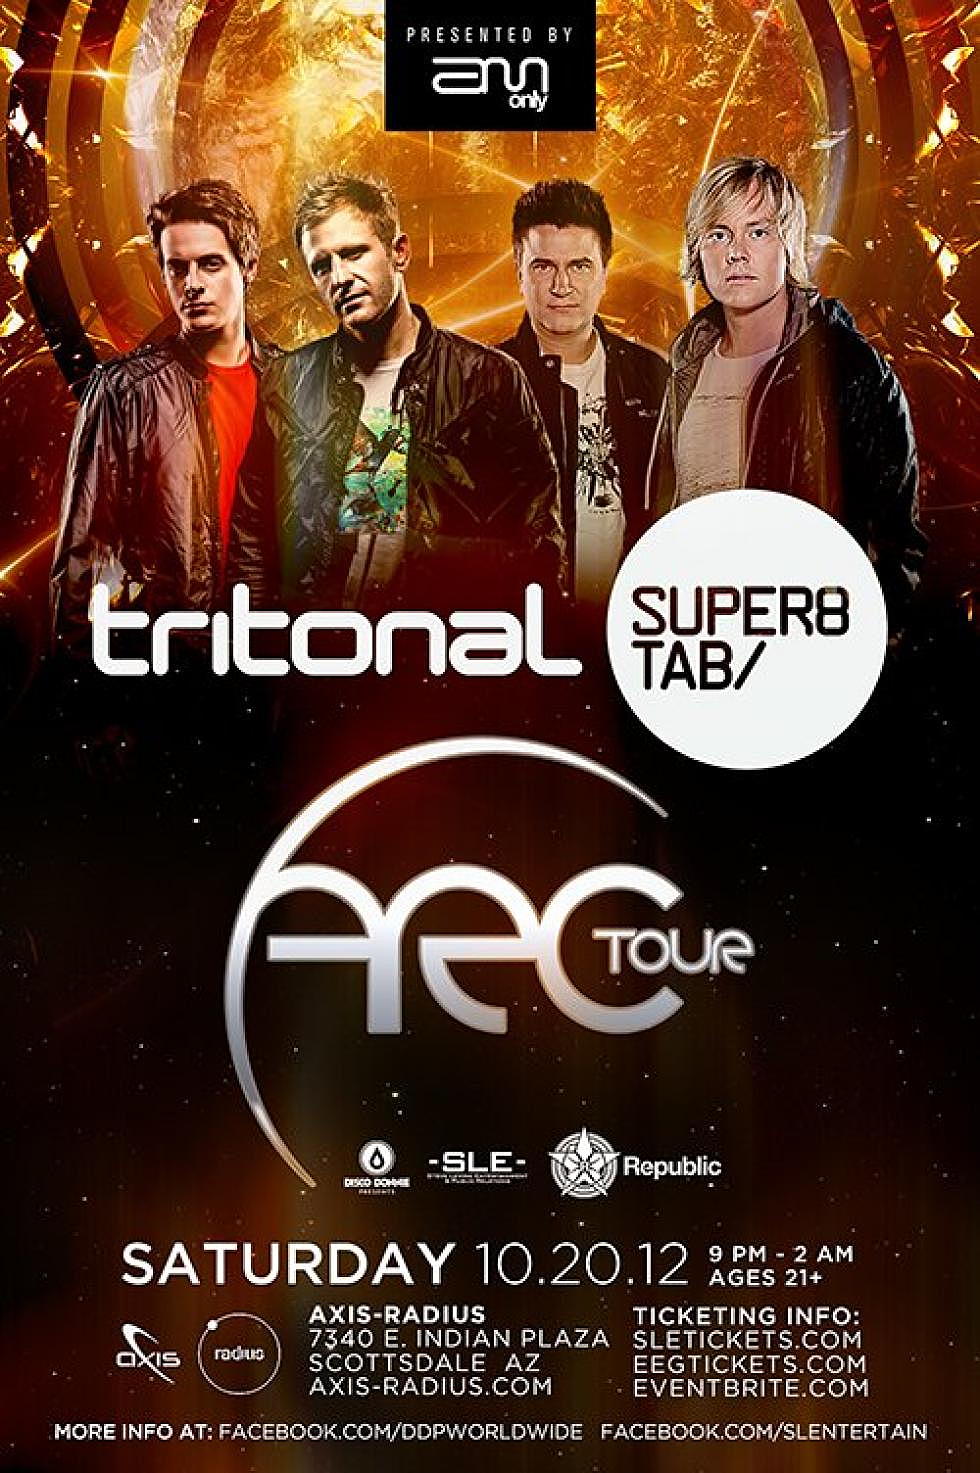 TRITONAL AND SUPER8 &#038; TAB ARC TOUR MAKES STOP AT AXIS RADIUS in Scottsdale October 20th